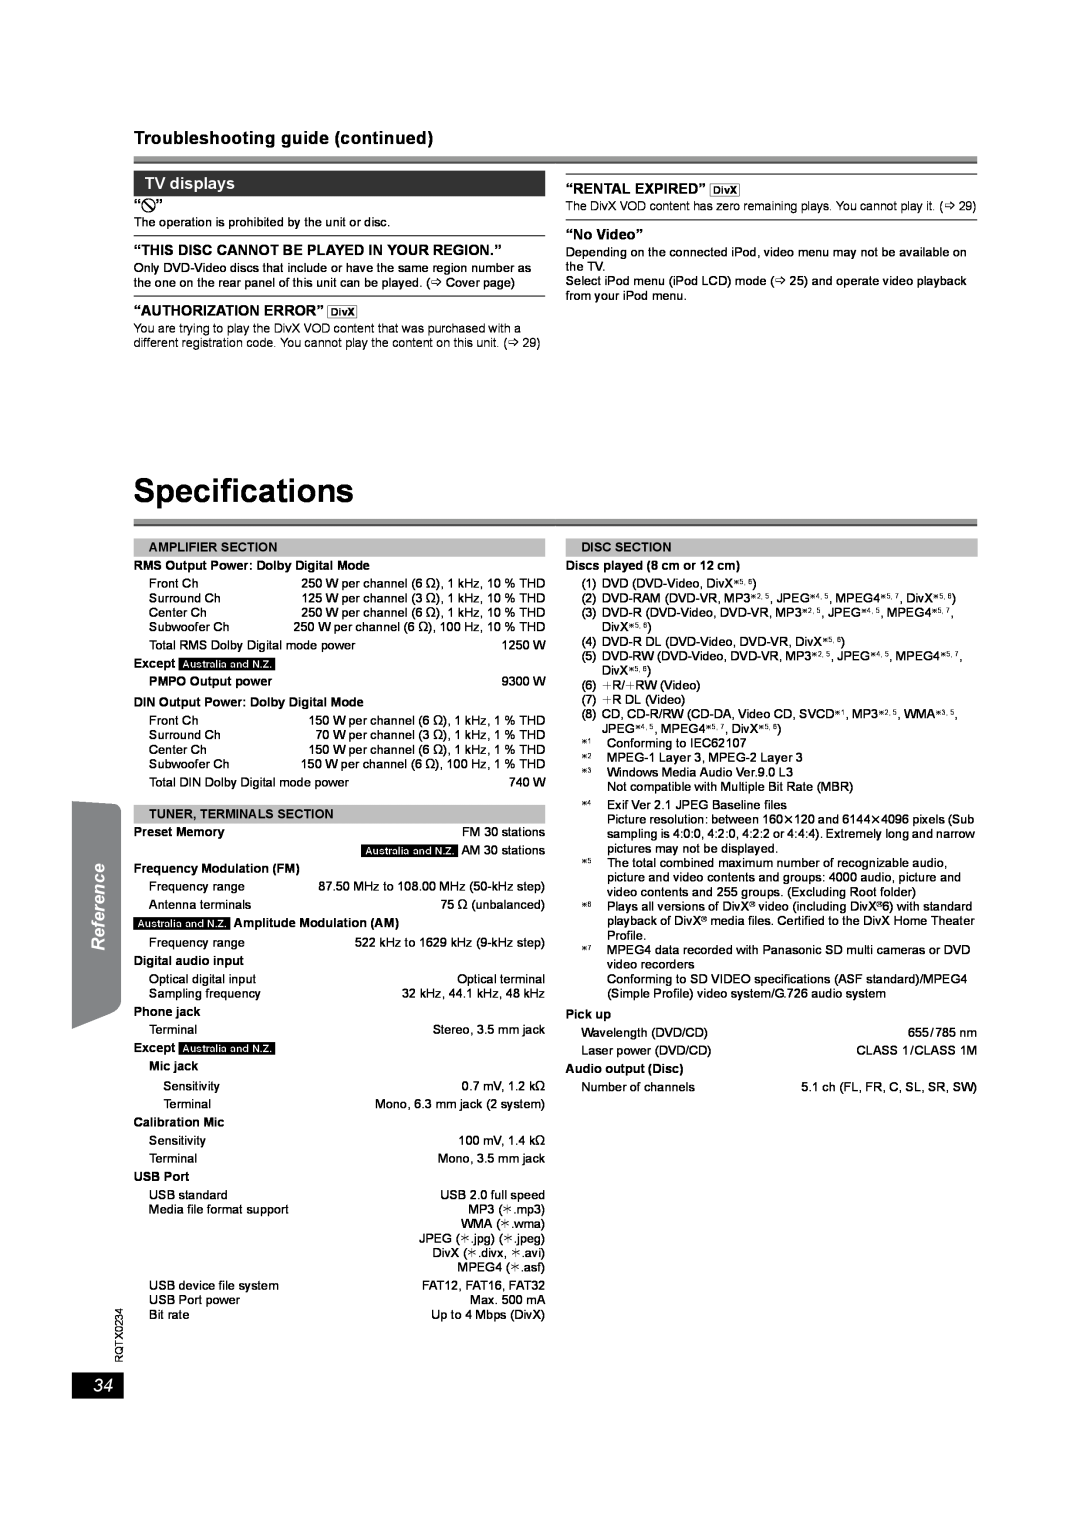 Panasonic SC-PT875 Specifications, Troubleshooting guide continued, TV displays, Getting Started, Playing Discs 